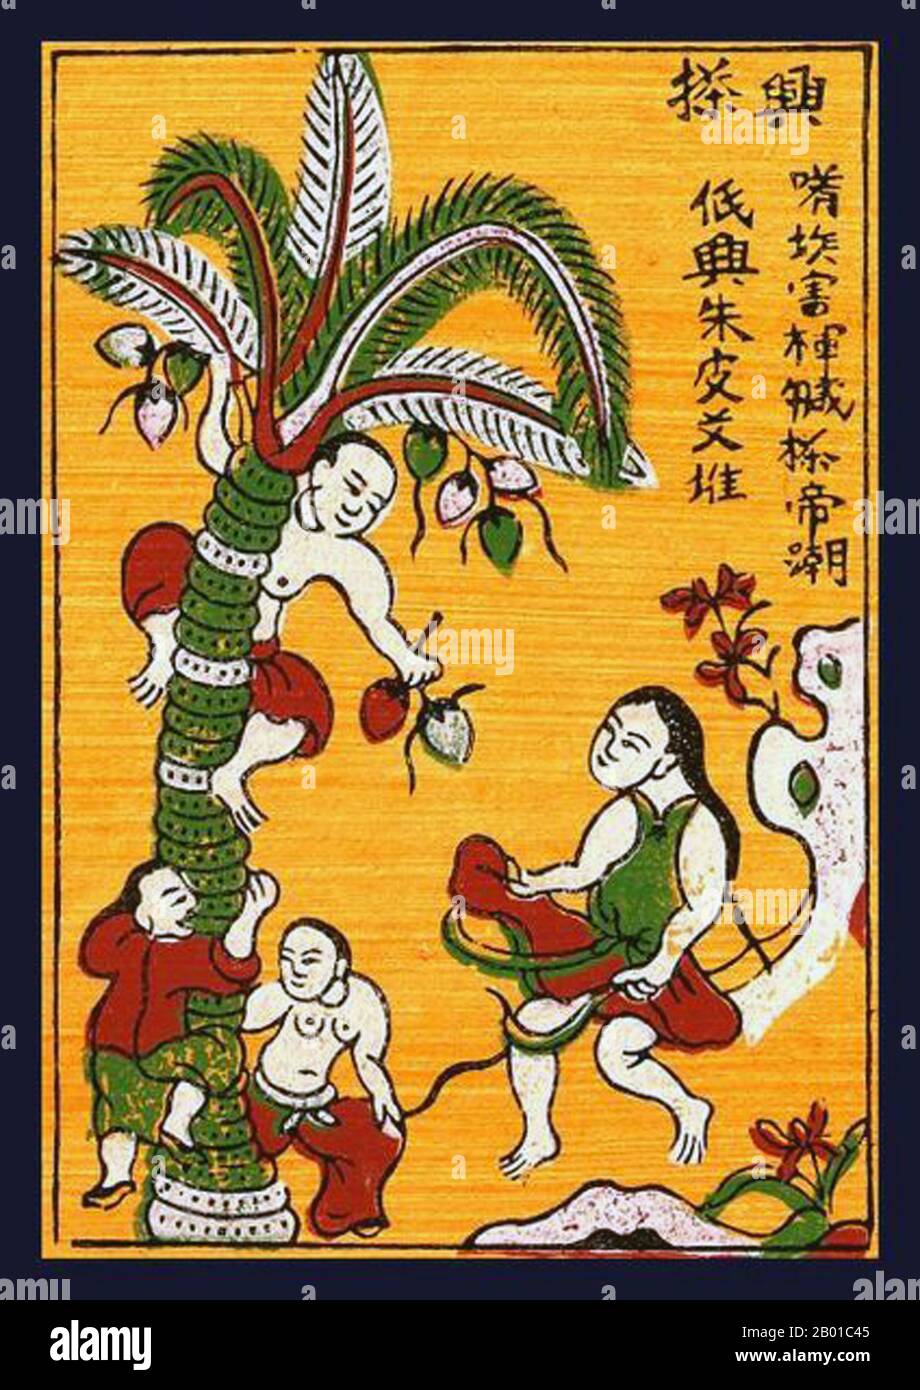 Vietnam: Collecting coconuts - traditional woodblock painting from Dong Ho village, Bac Ninh Province.  Dong Ho painting (Vietnamese: Tranh Đông Hồ or Tranh làng Hồ), full name Dong Ho folk woodcut painting (Tranh khắc gỗ dân gian Đông Hồ) is a genre of Vietnamese woodcut paintings originating from Dong Ho village (làng Đông Hồ) in Bac Ninh Province, Vietnam.  Using the traditional điệp paper and colours derived from nature, craftsmen print Dong Ho pictures of different themes from good luck wishes, historical figures to everyday activities and folk allegories. Stock Photo